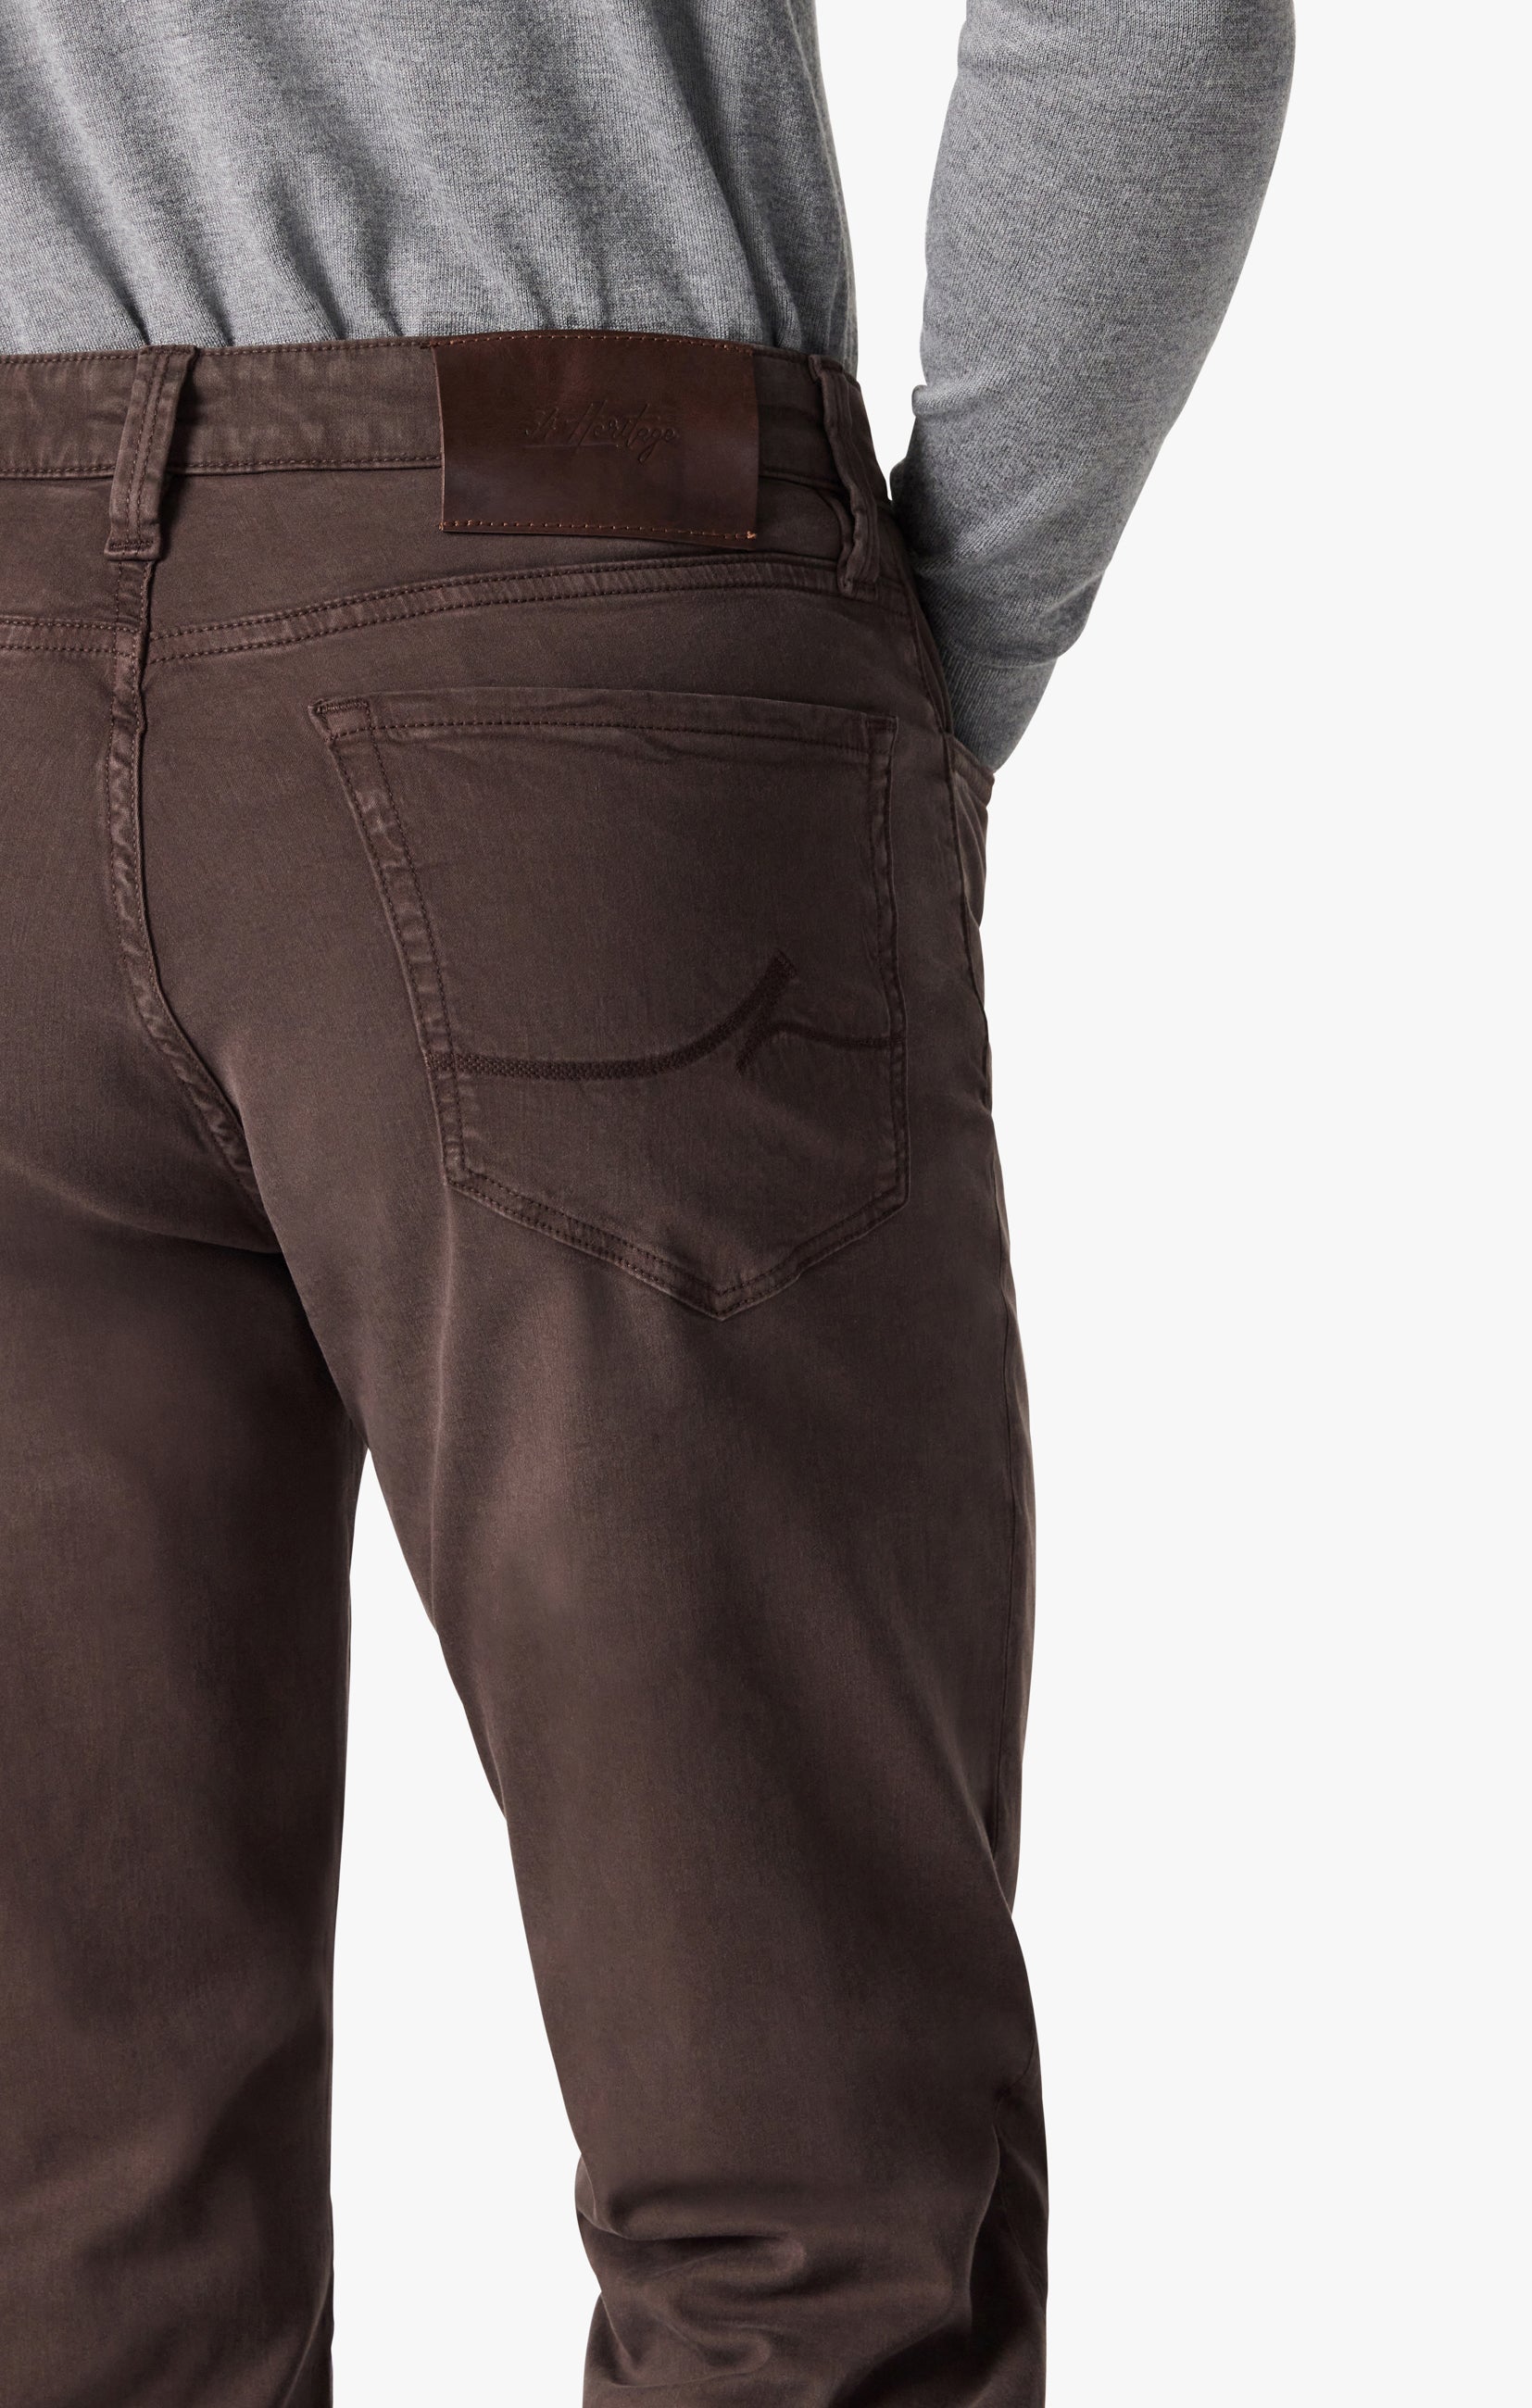 Charisma Relaxed Straight Leg Pants In Fudge Twill Image 6